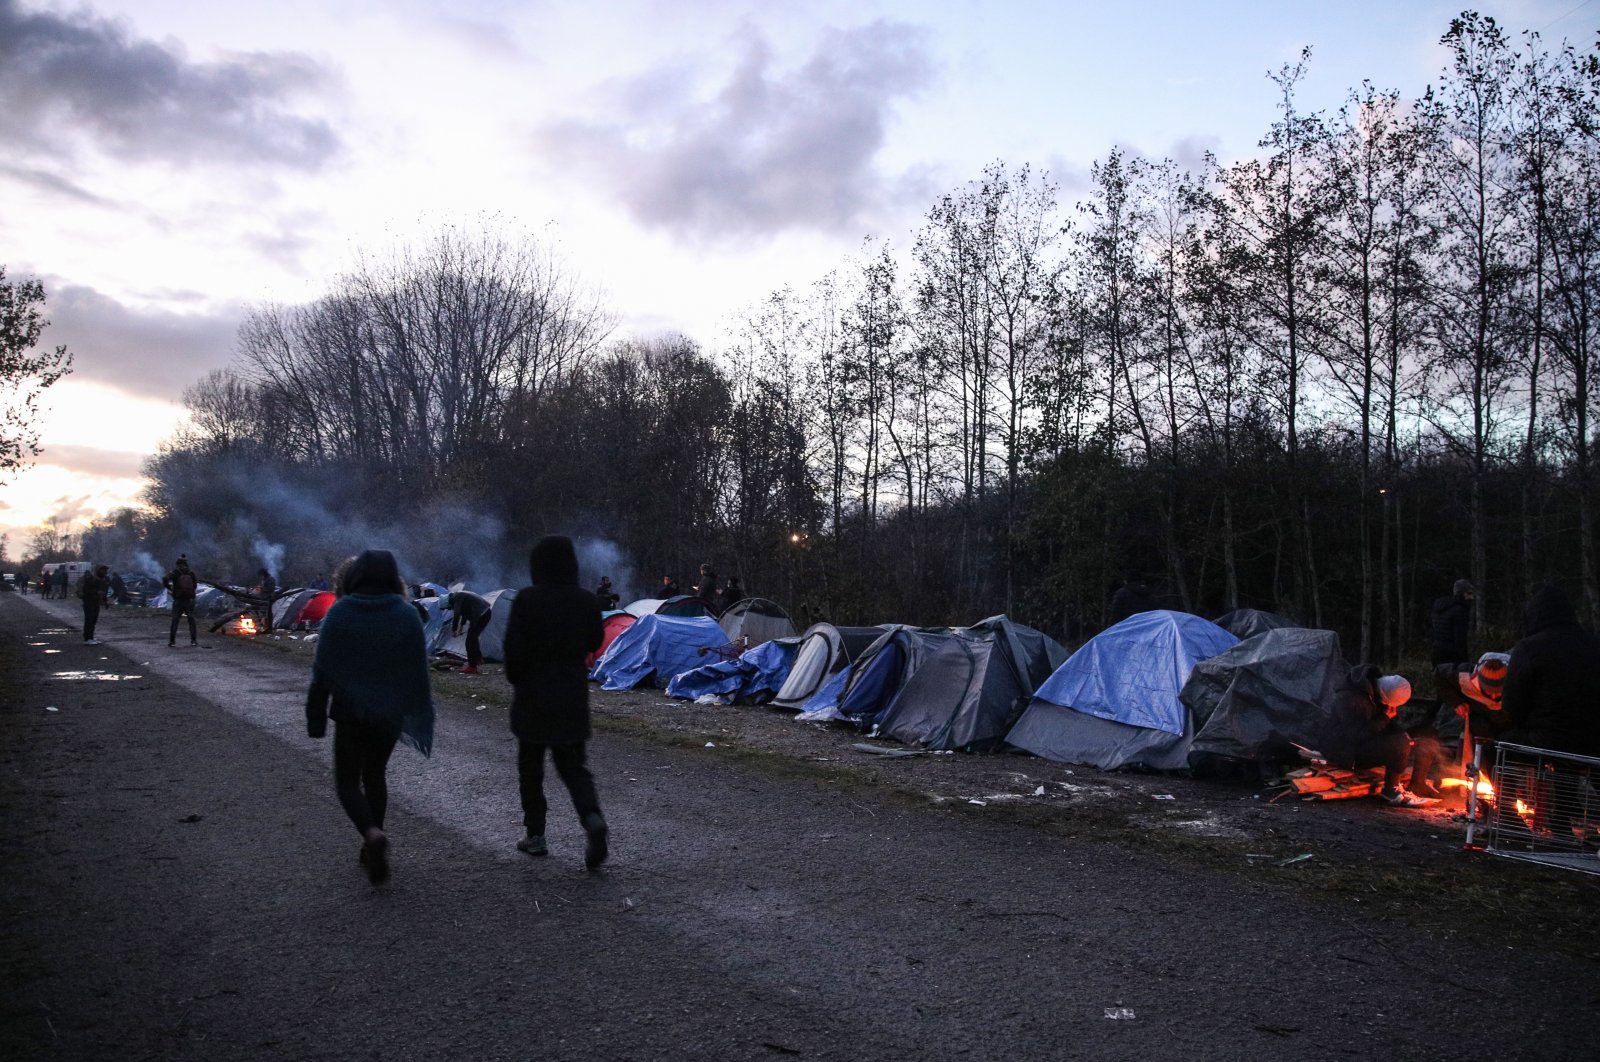 Migrants walk next to their tents in Grande-Synthe near Dunkirk, France, Nov. 25, 2021. (EPA Photo)